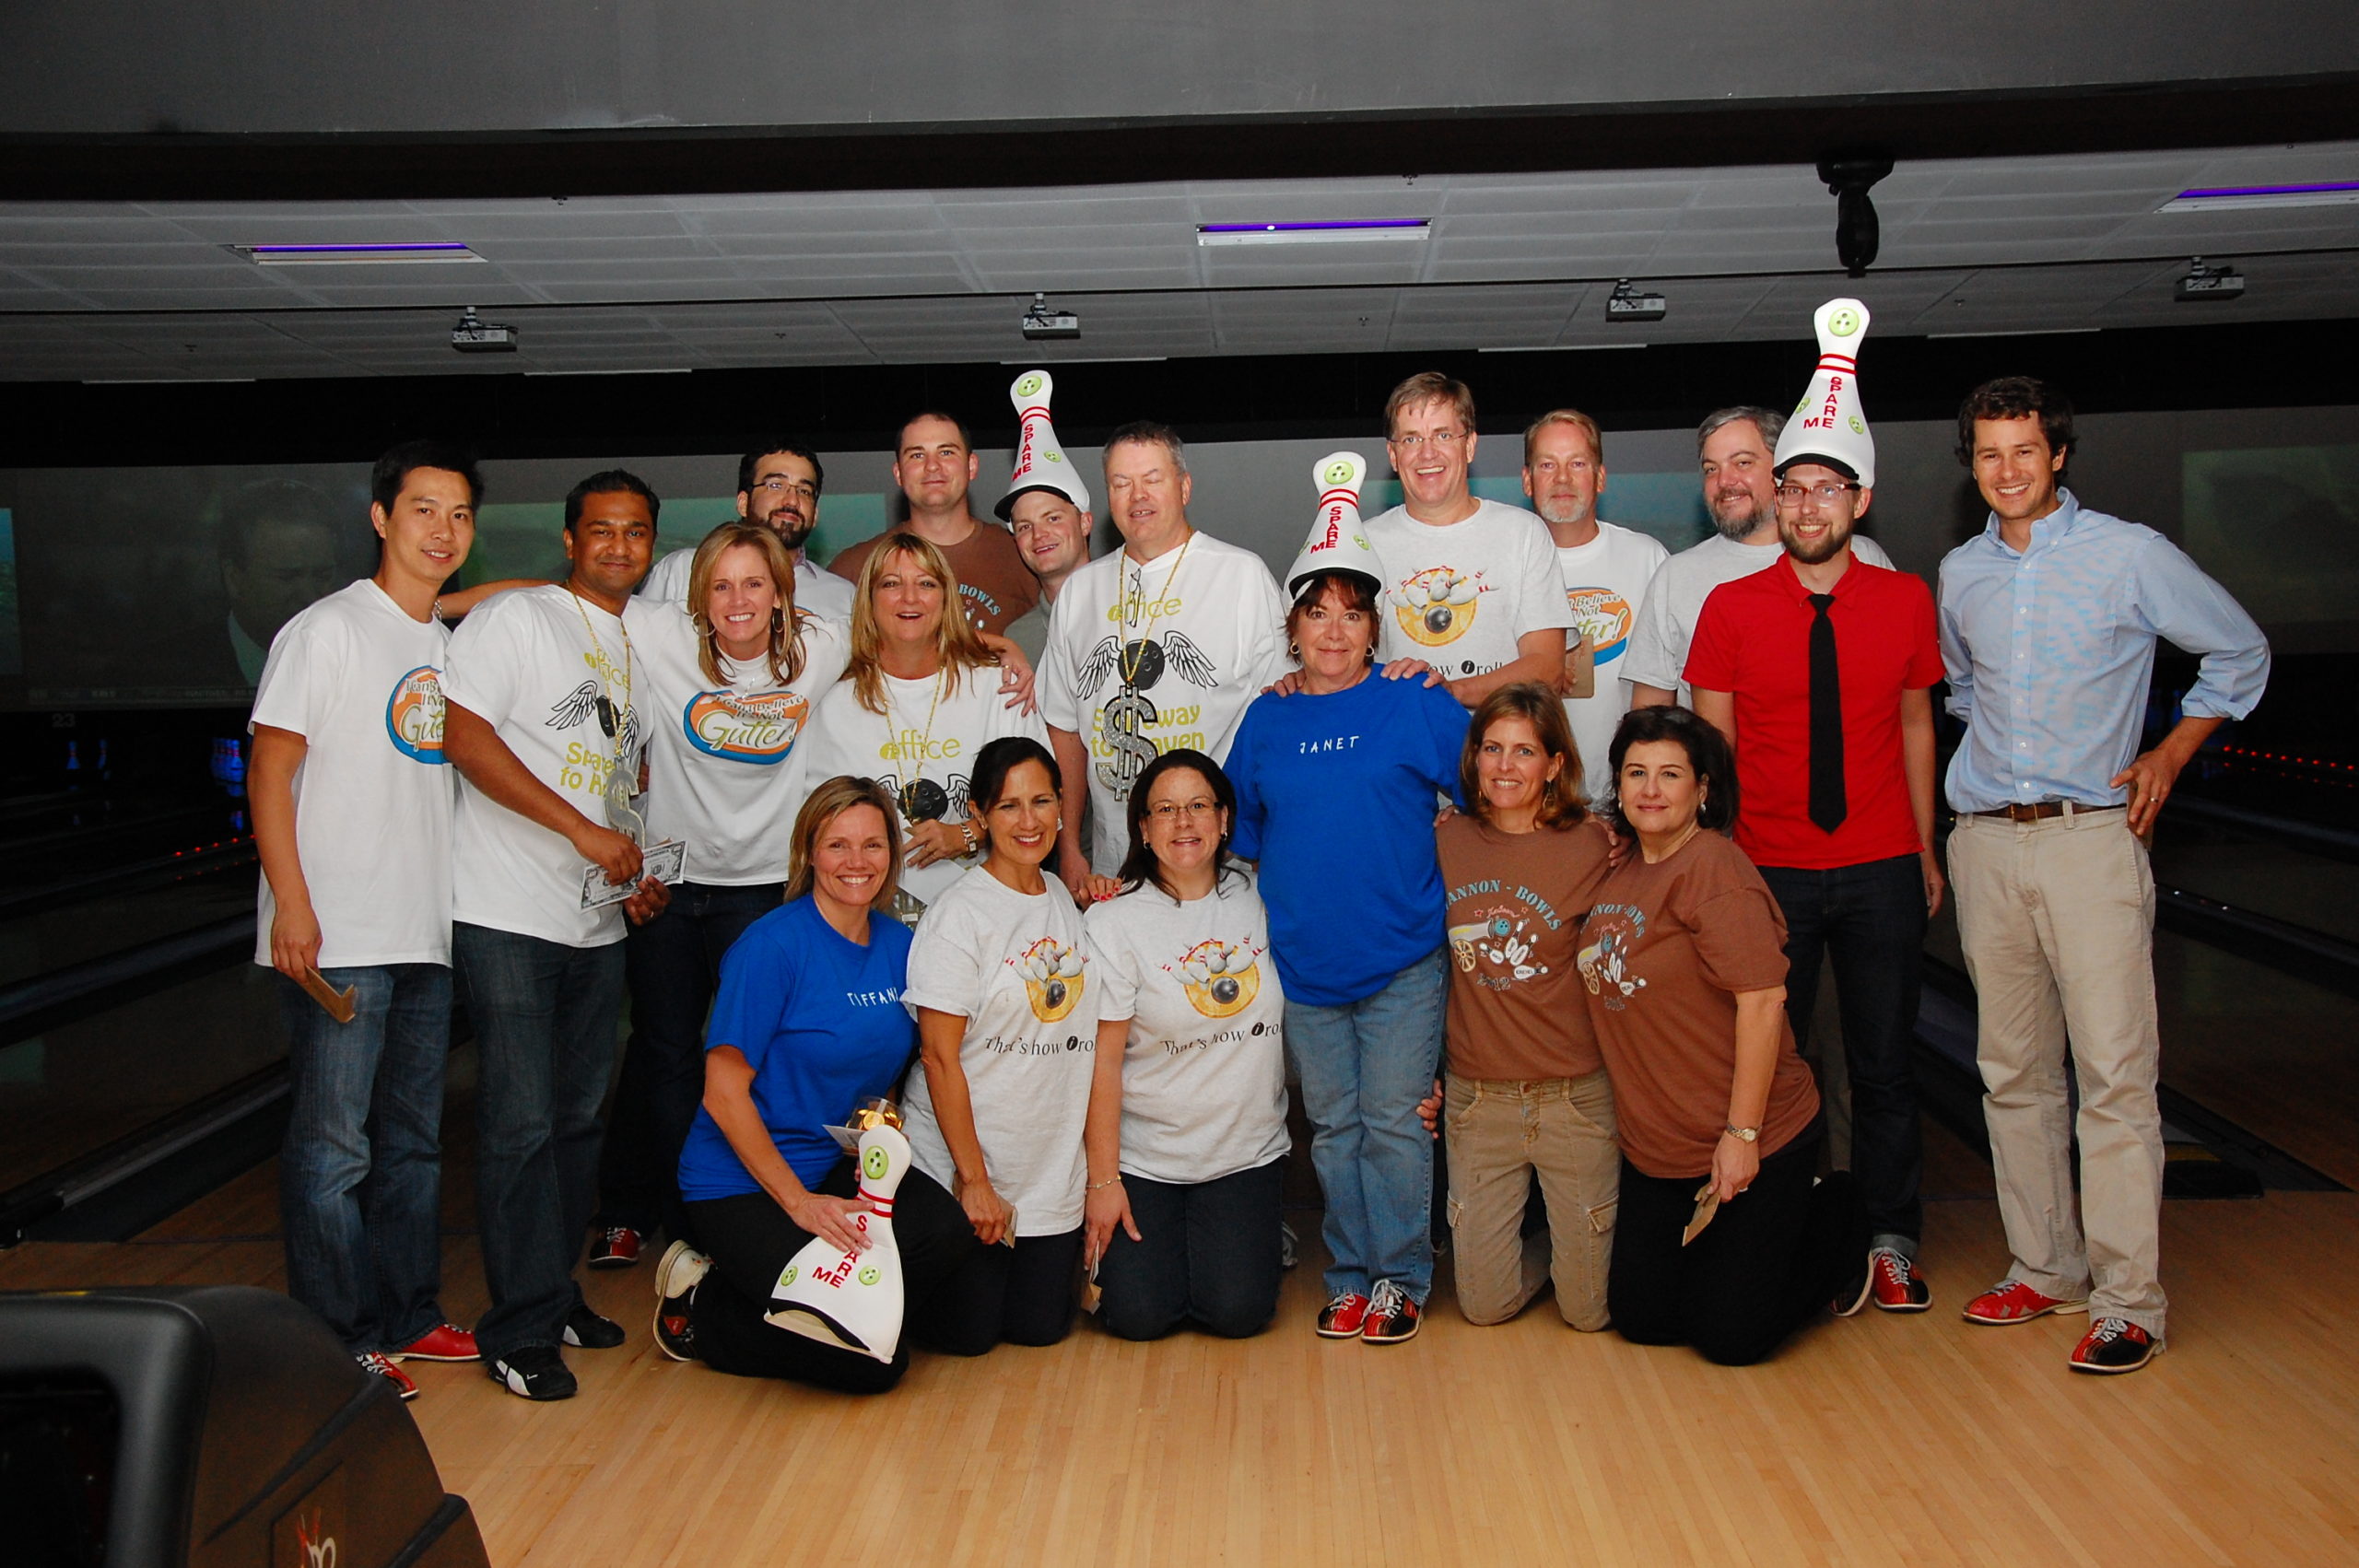 iOffice employees get together to bowl